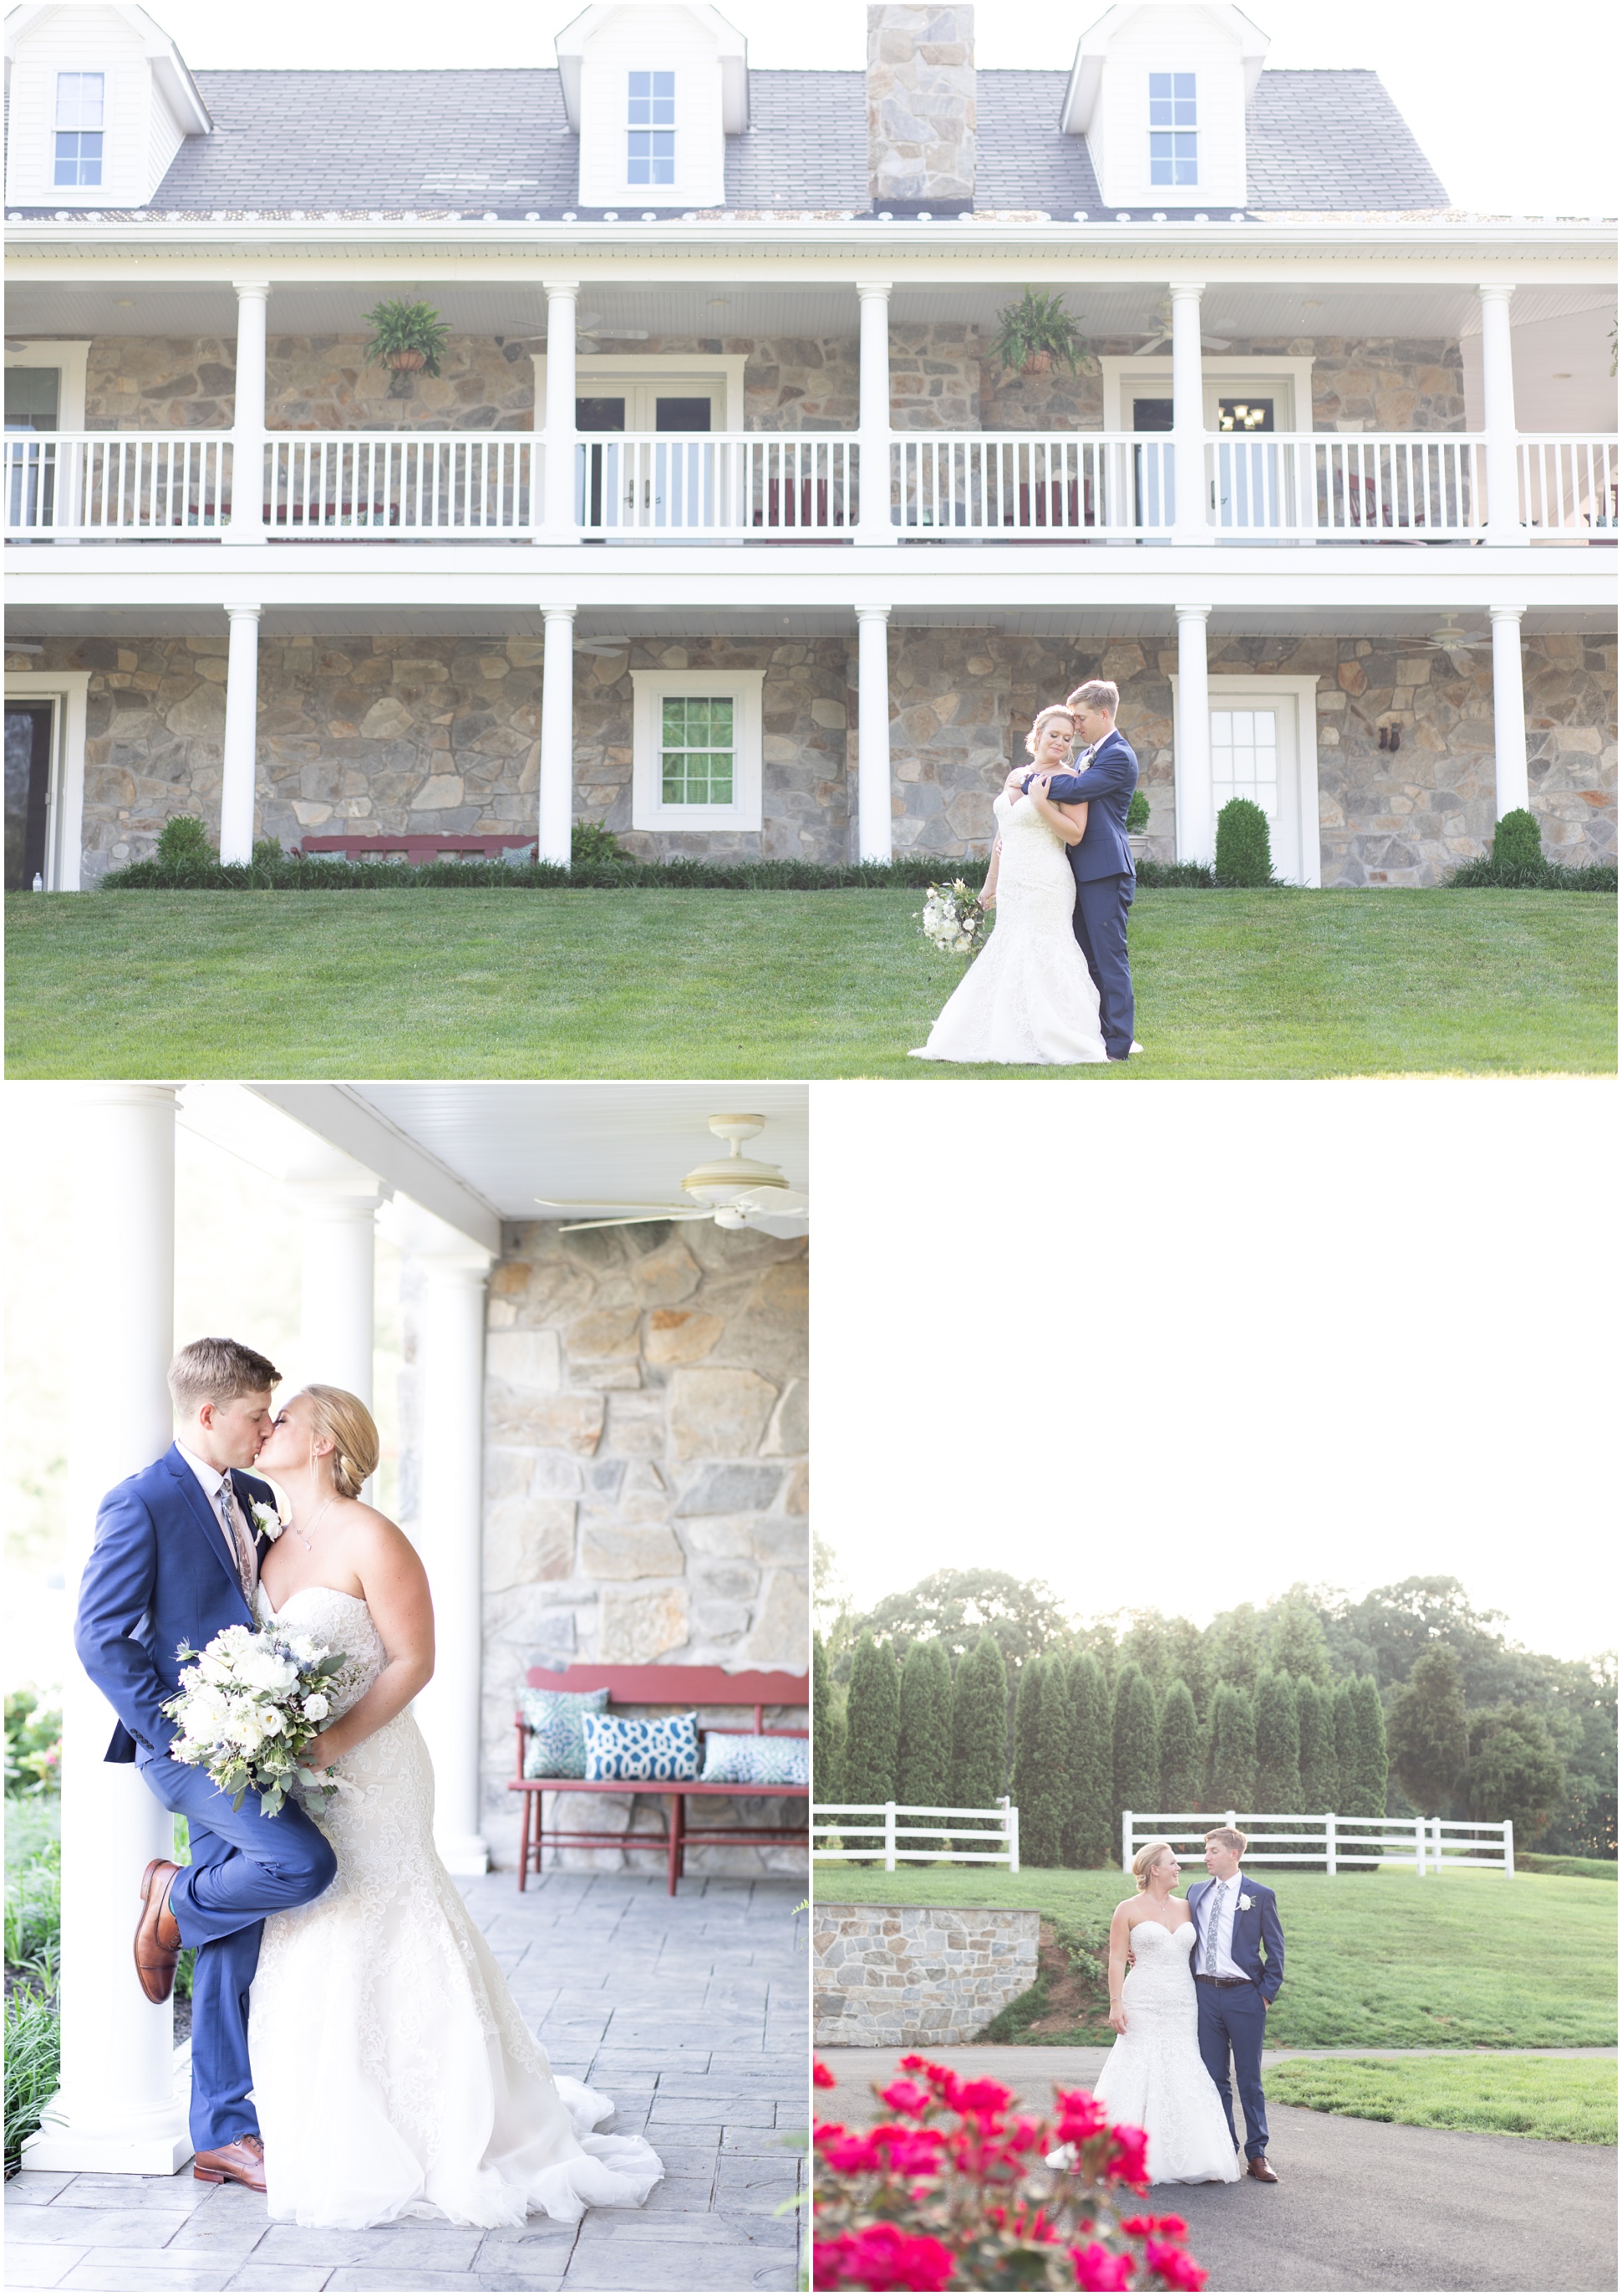 Bride and groom Portraits at Pond View Farms